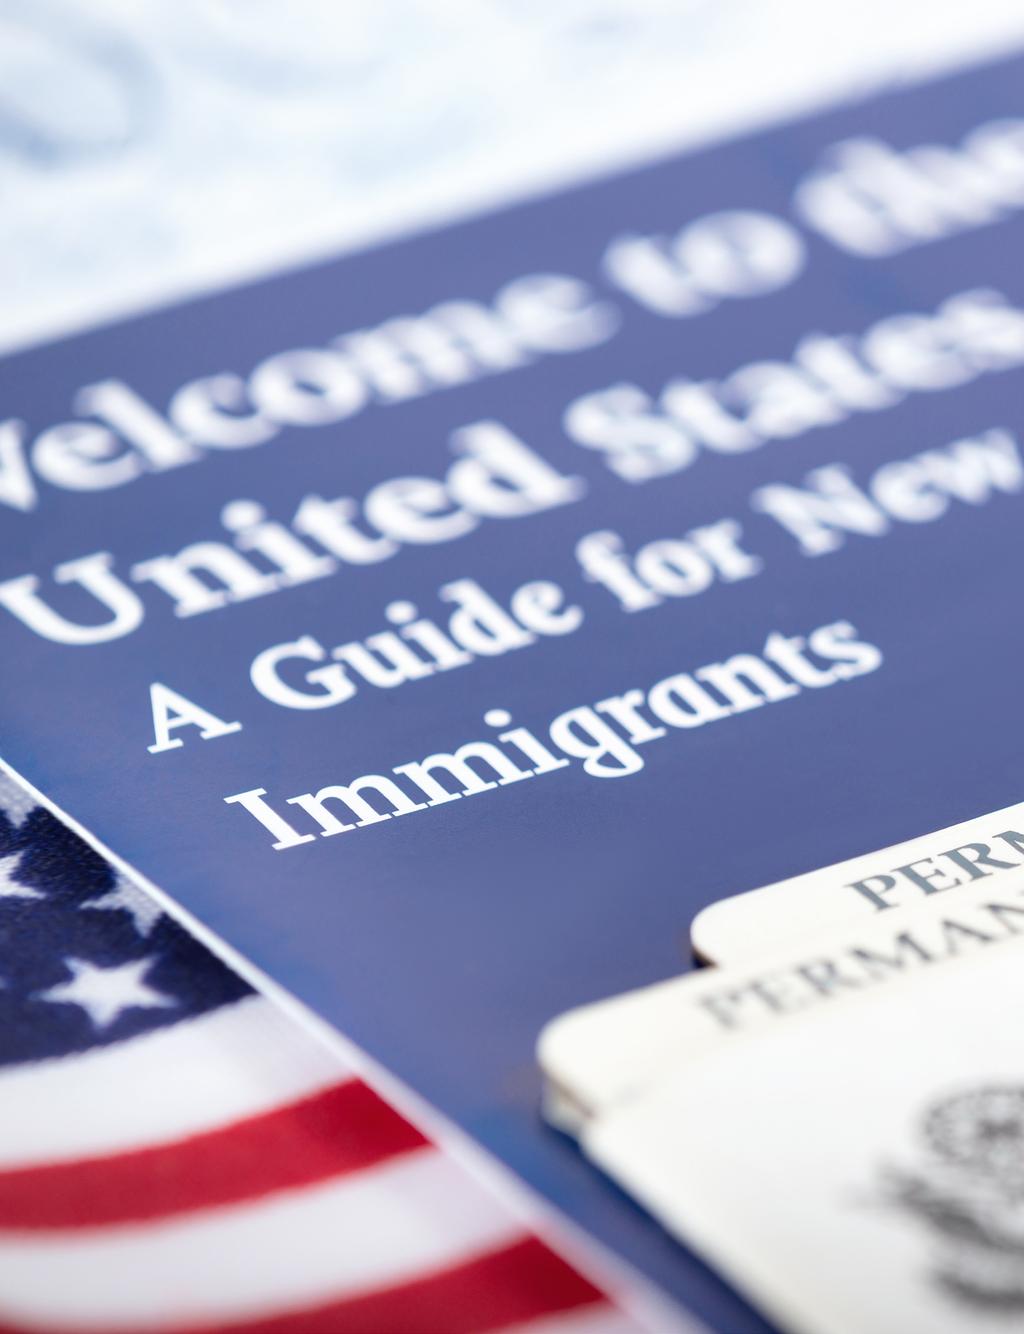 IMMIGRATION Of the more than 58 million 40 Hispanics living in the United States, 35% are foreign-born. 41 Federal immigration law and policy continues to be a top priority for the Latino community.